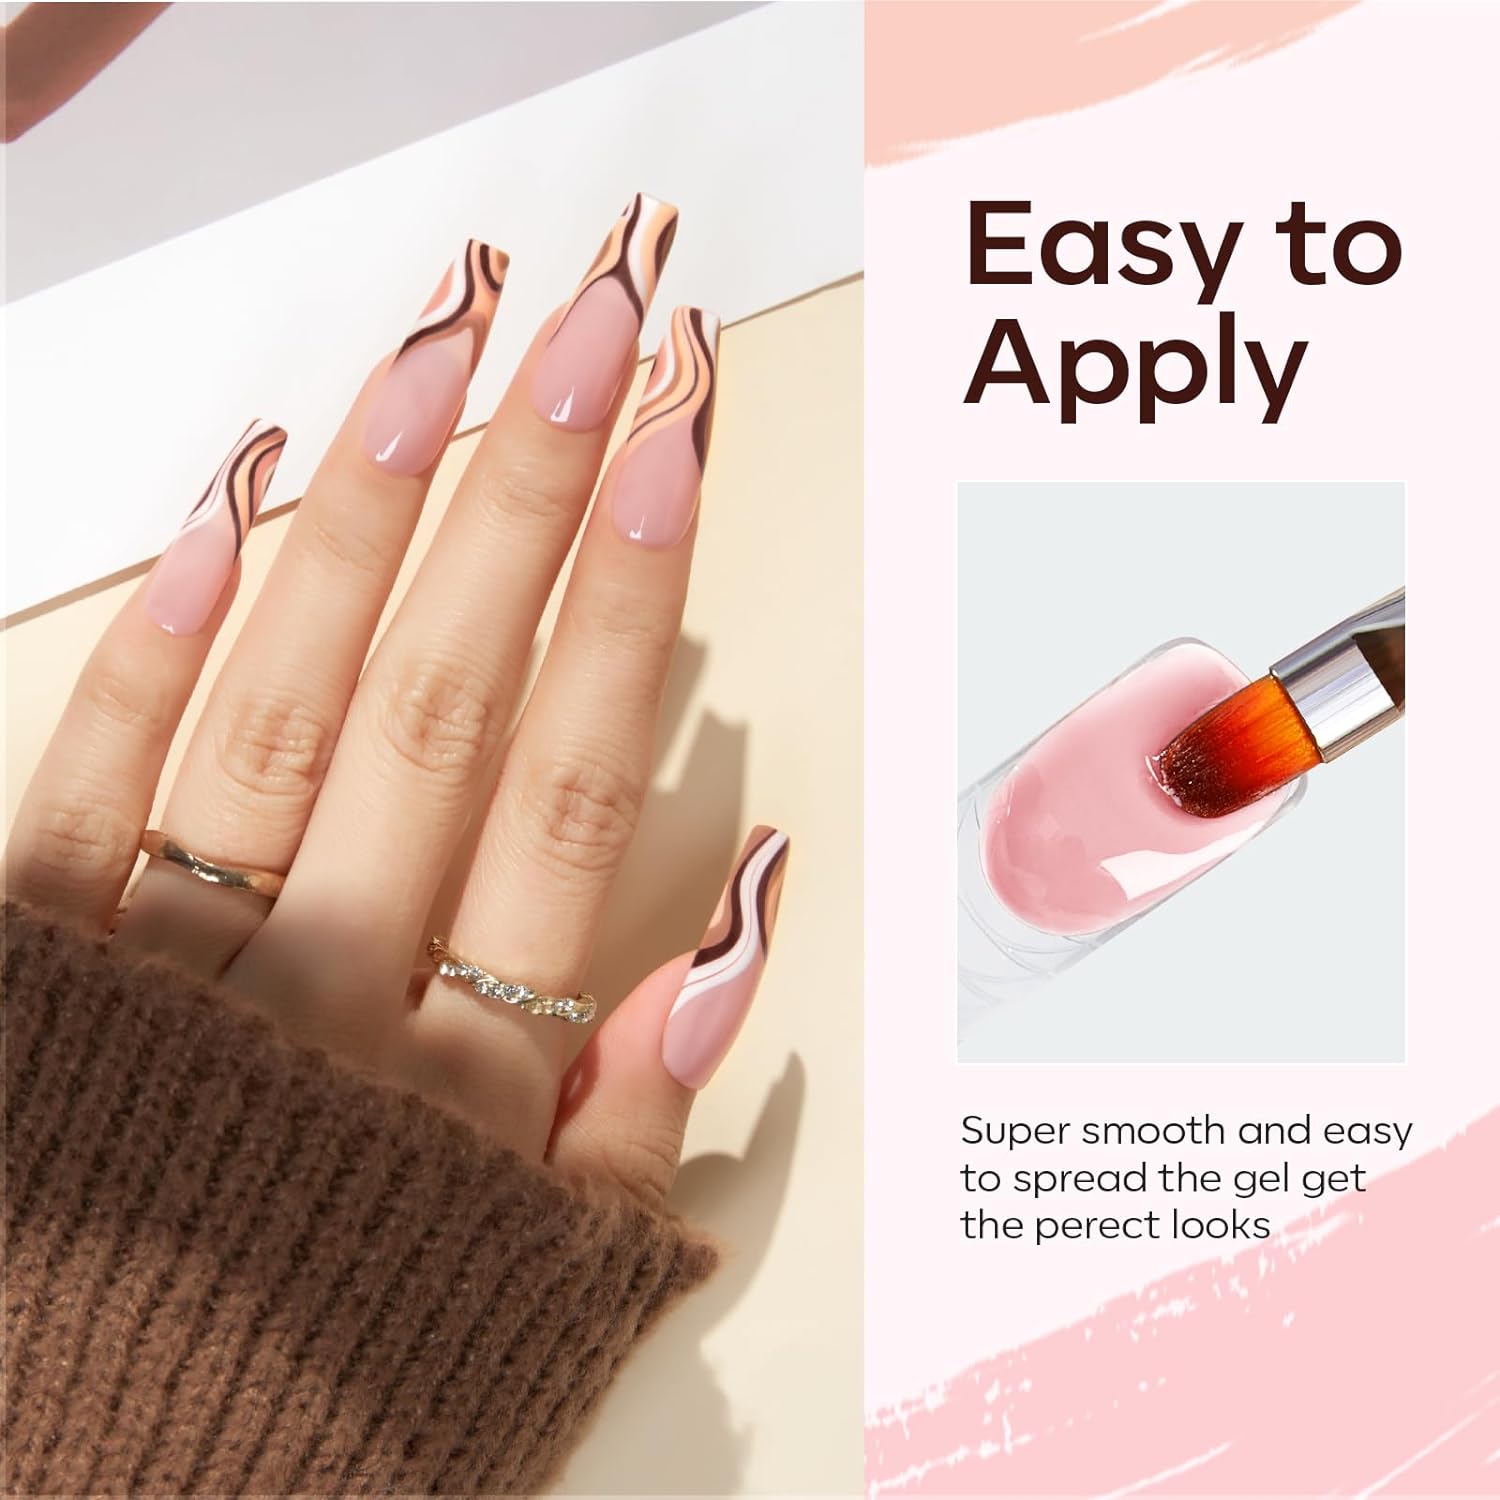 Fantasy Time - 20 Colors Poly Nail Gel Kit【US ONLY】